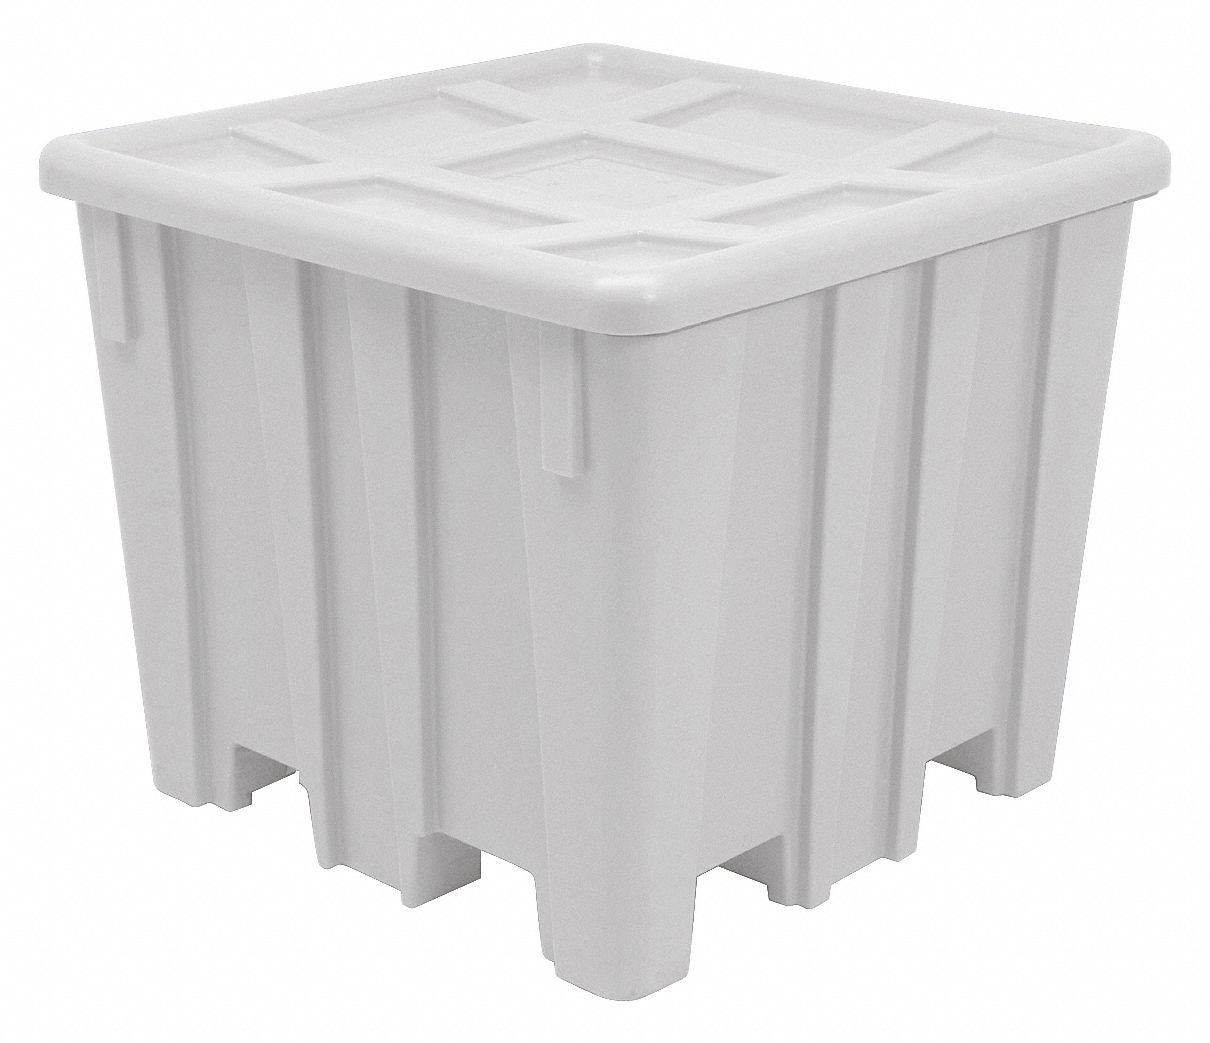 Bulk Container: 35 cu ft, 47 1/2 in x 47 1/2 in x 40 1/4 in, Includes Lid, 4-Way Entry